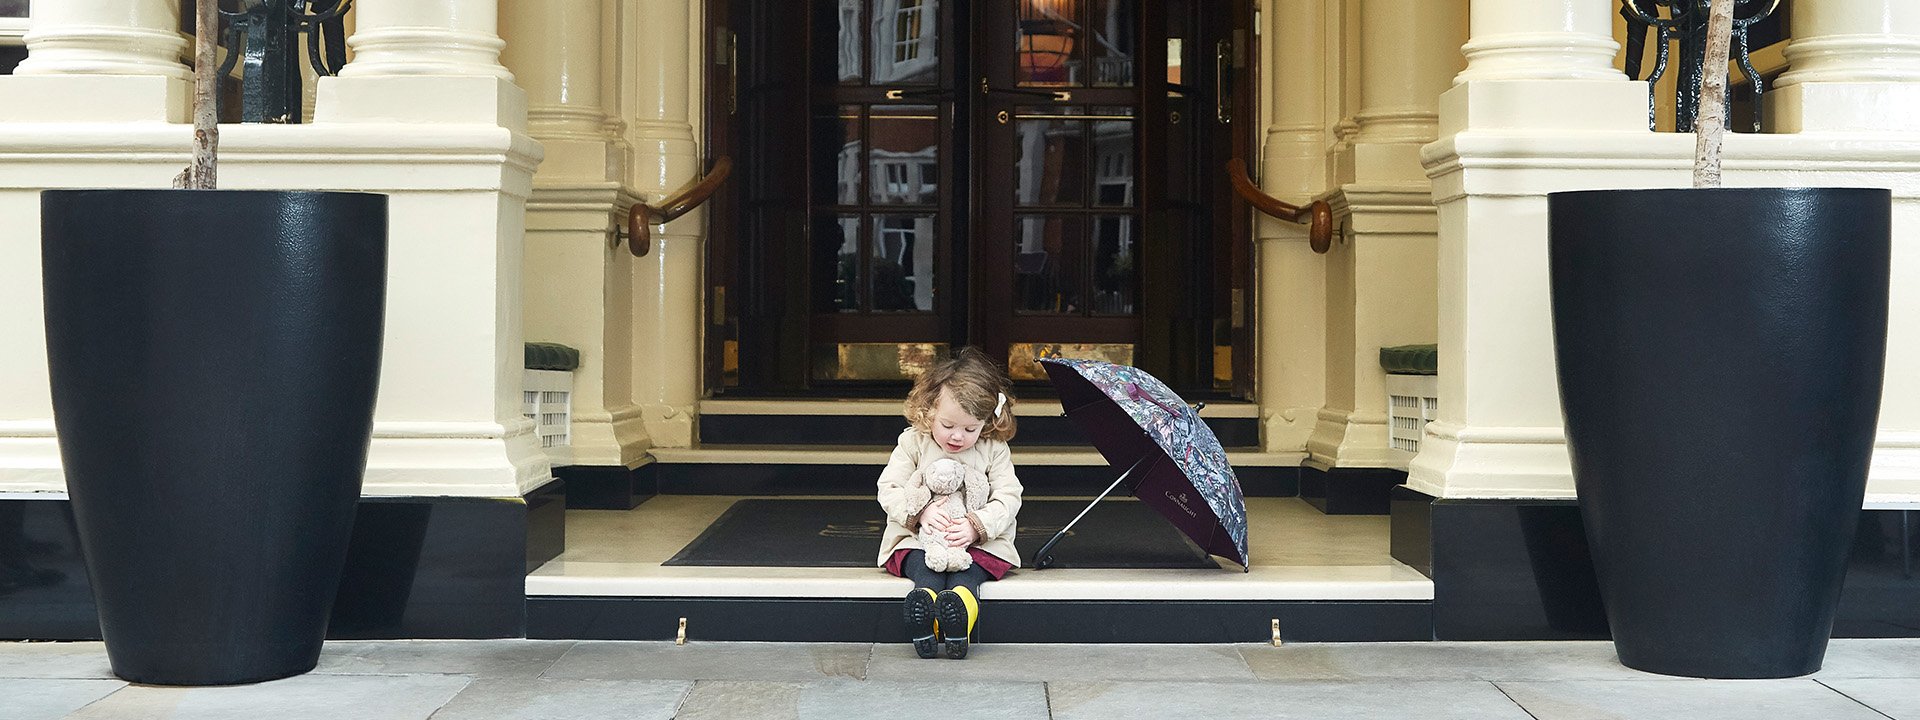 
A little girl with a stuffed bunny next to an open umbrella, sitting at the entrance of The Connaught hotel.